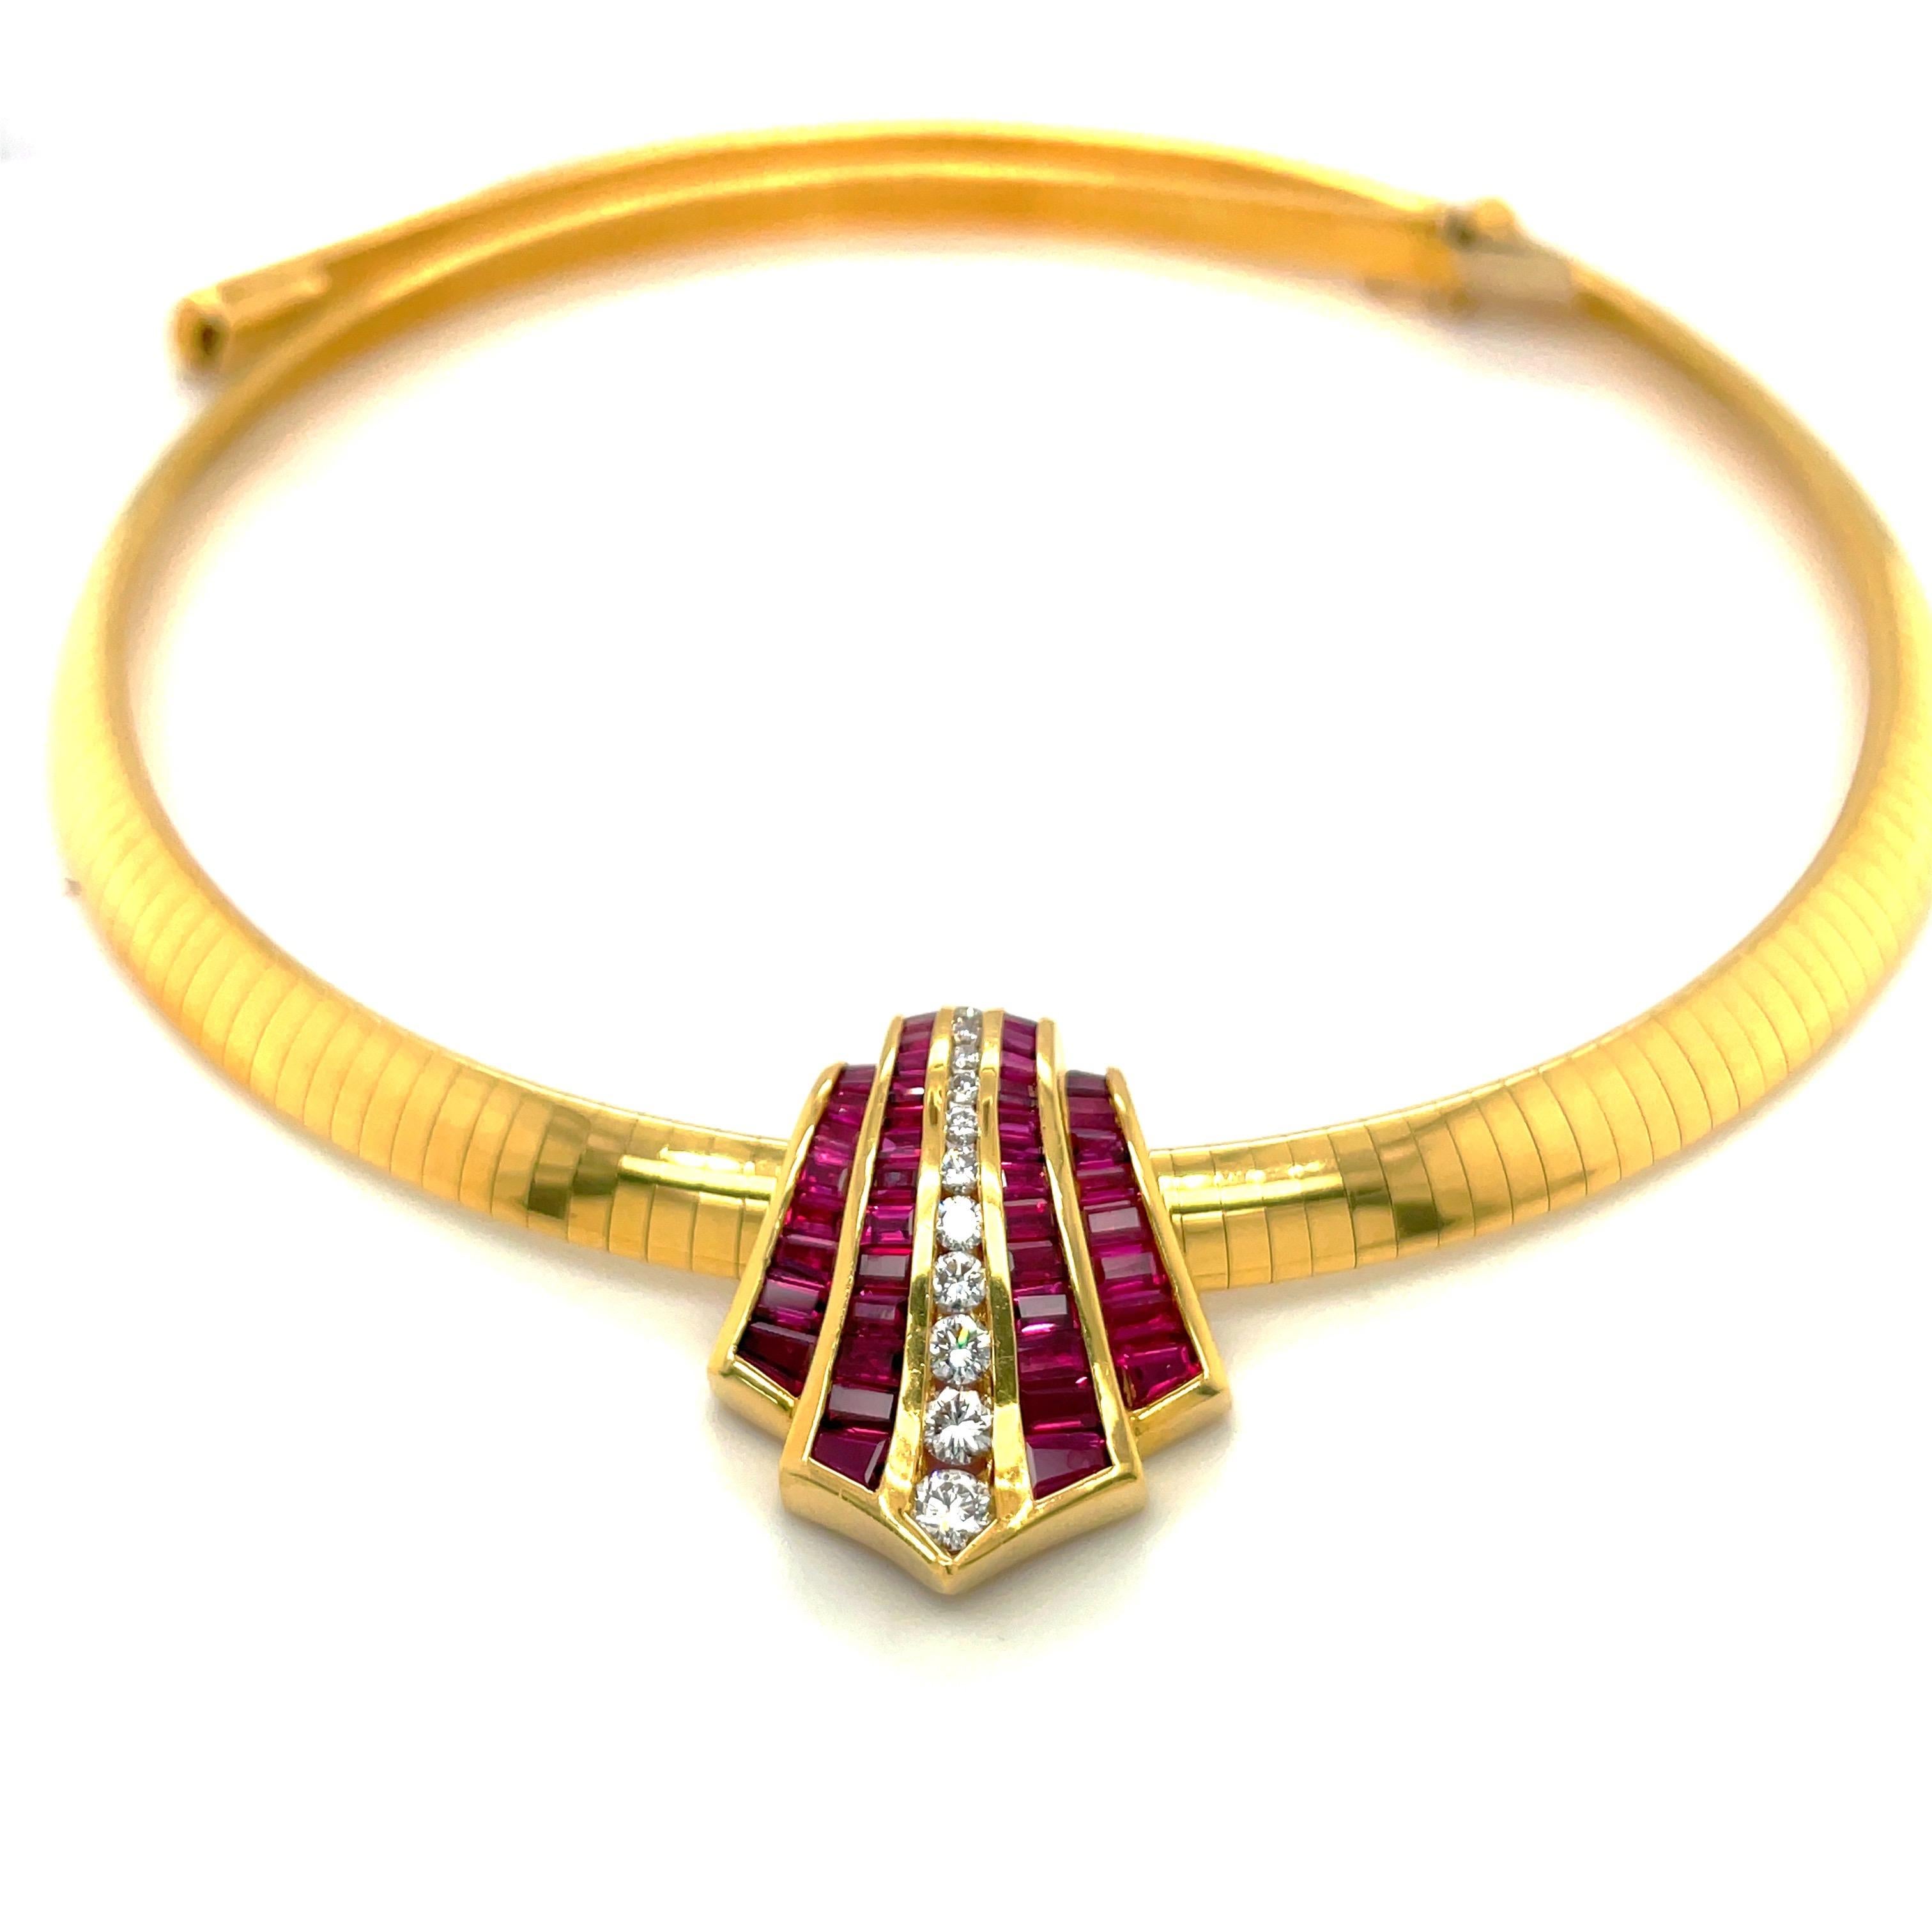 Designed by Charles Krypell, jewelers since 1976. This pendant necklace is a perfect example of fine craftsmanship featuring invisibly set baguette cut rubies and round brilliant diamonds. The 4 sections of rubies and single row of round brilliant